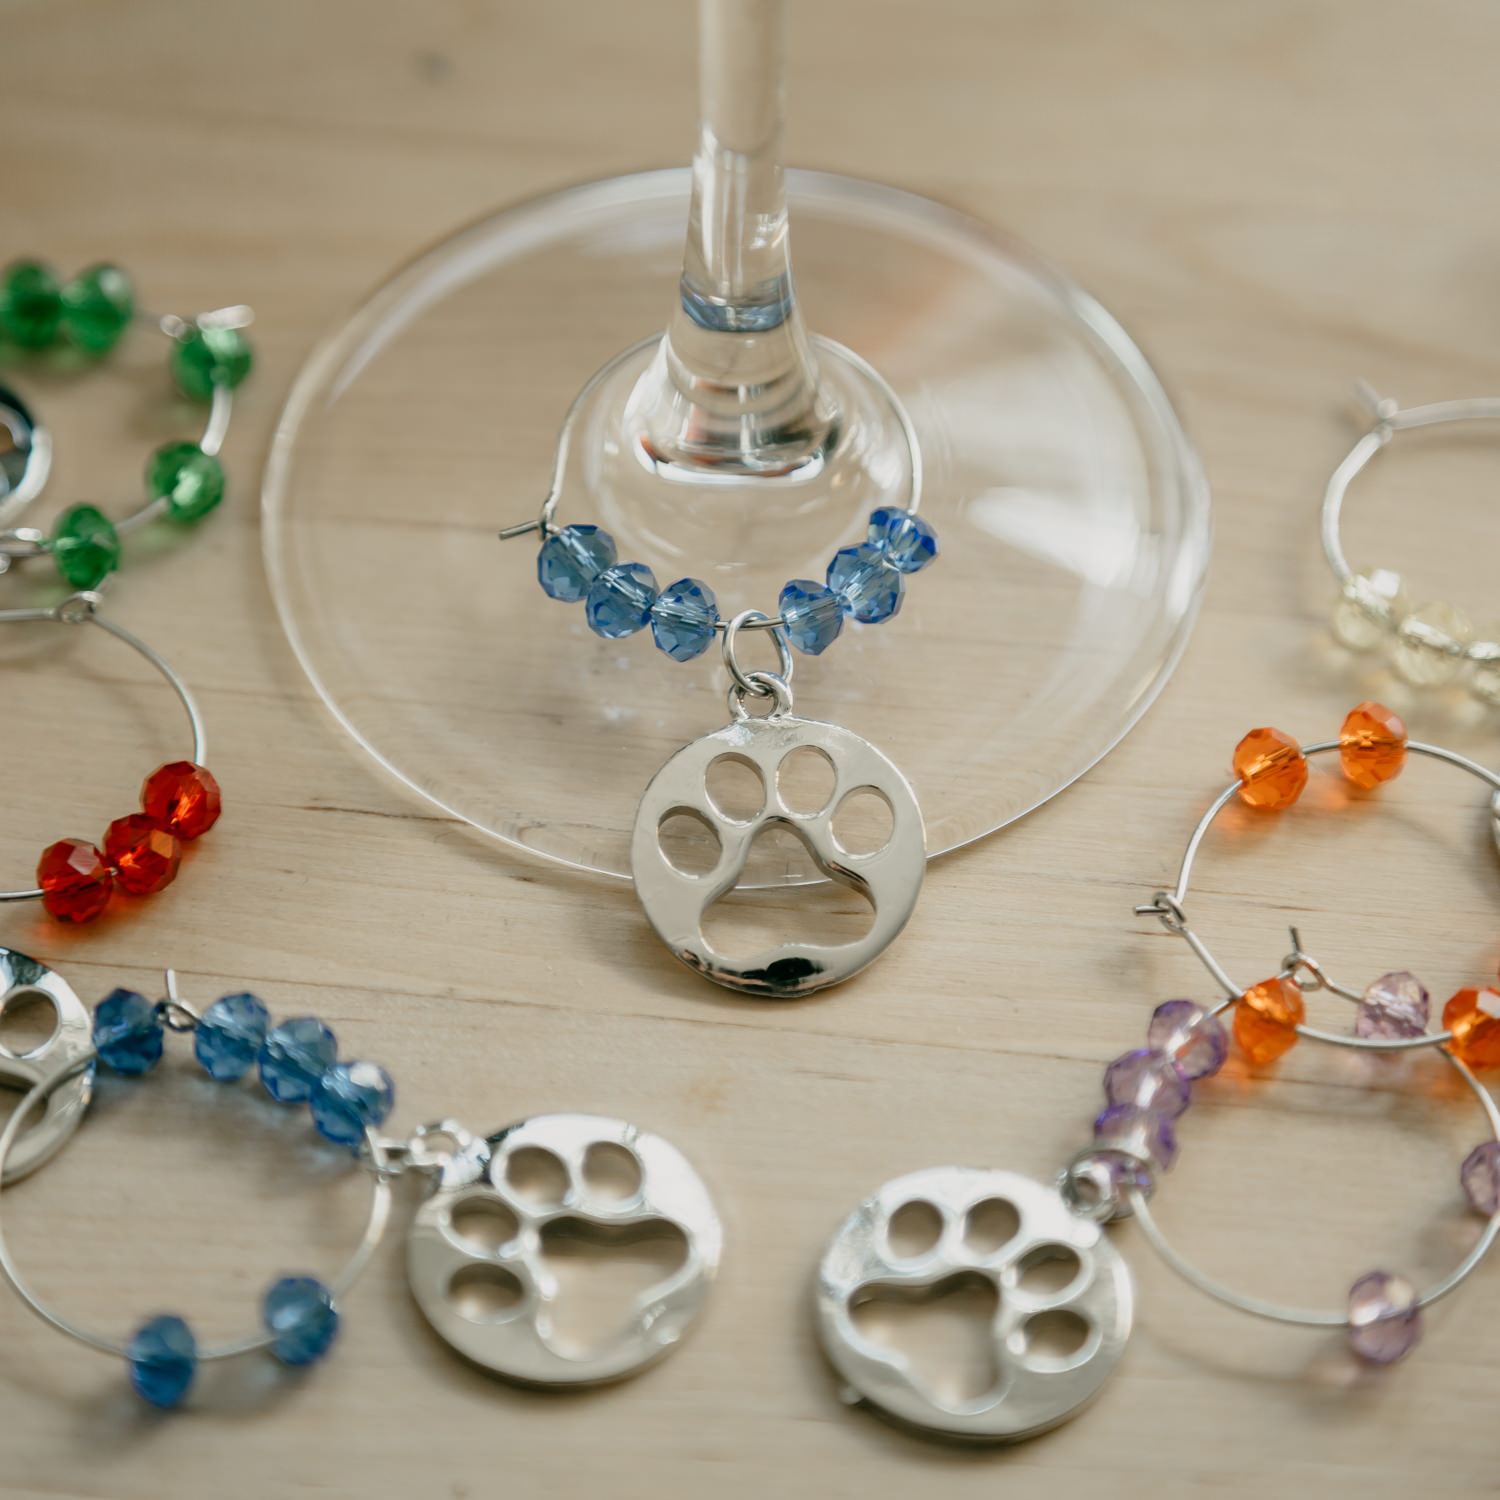 Doe een poging Stereotype Daarom Wine Glass Charms (Set of 6) - Kotas Place Dog Daycare